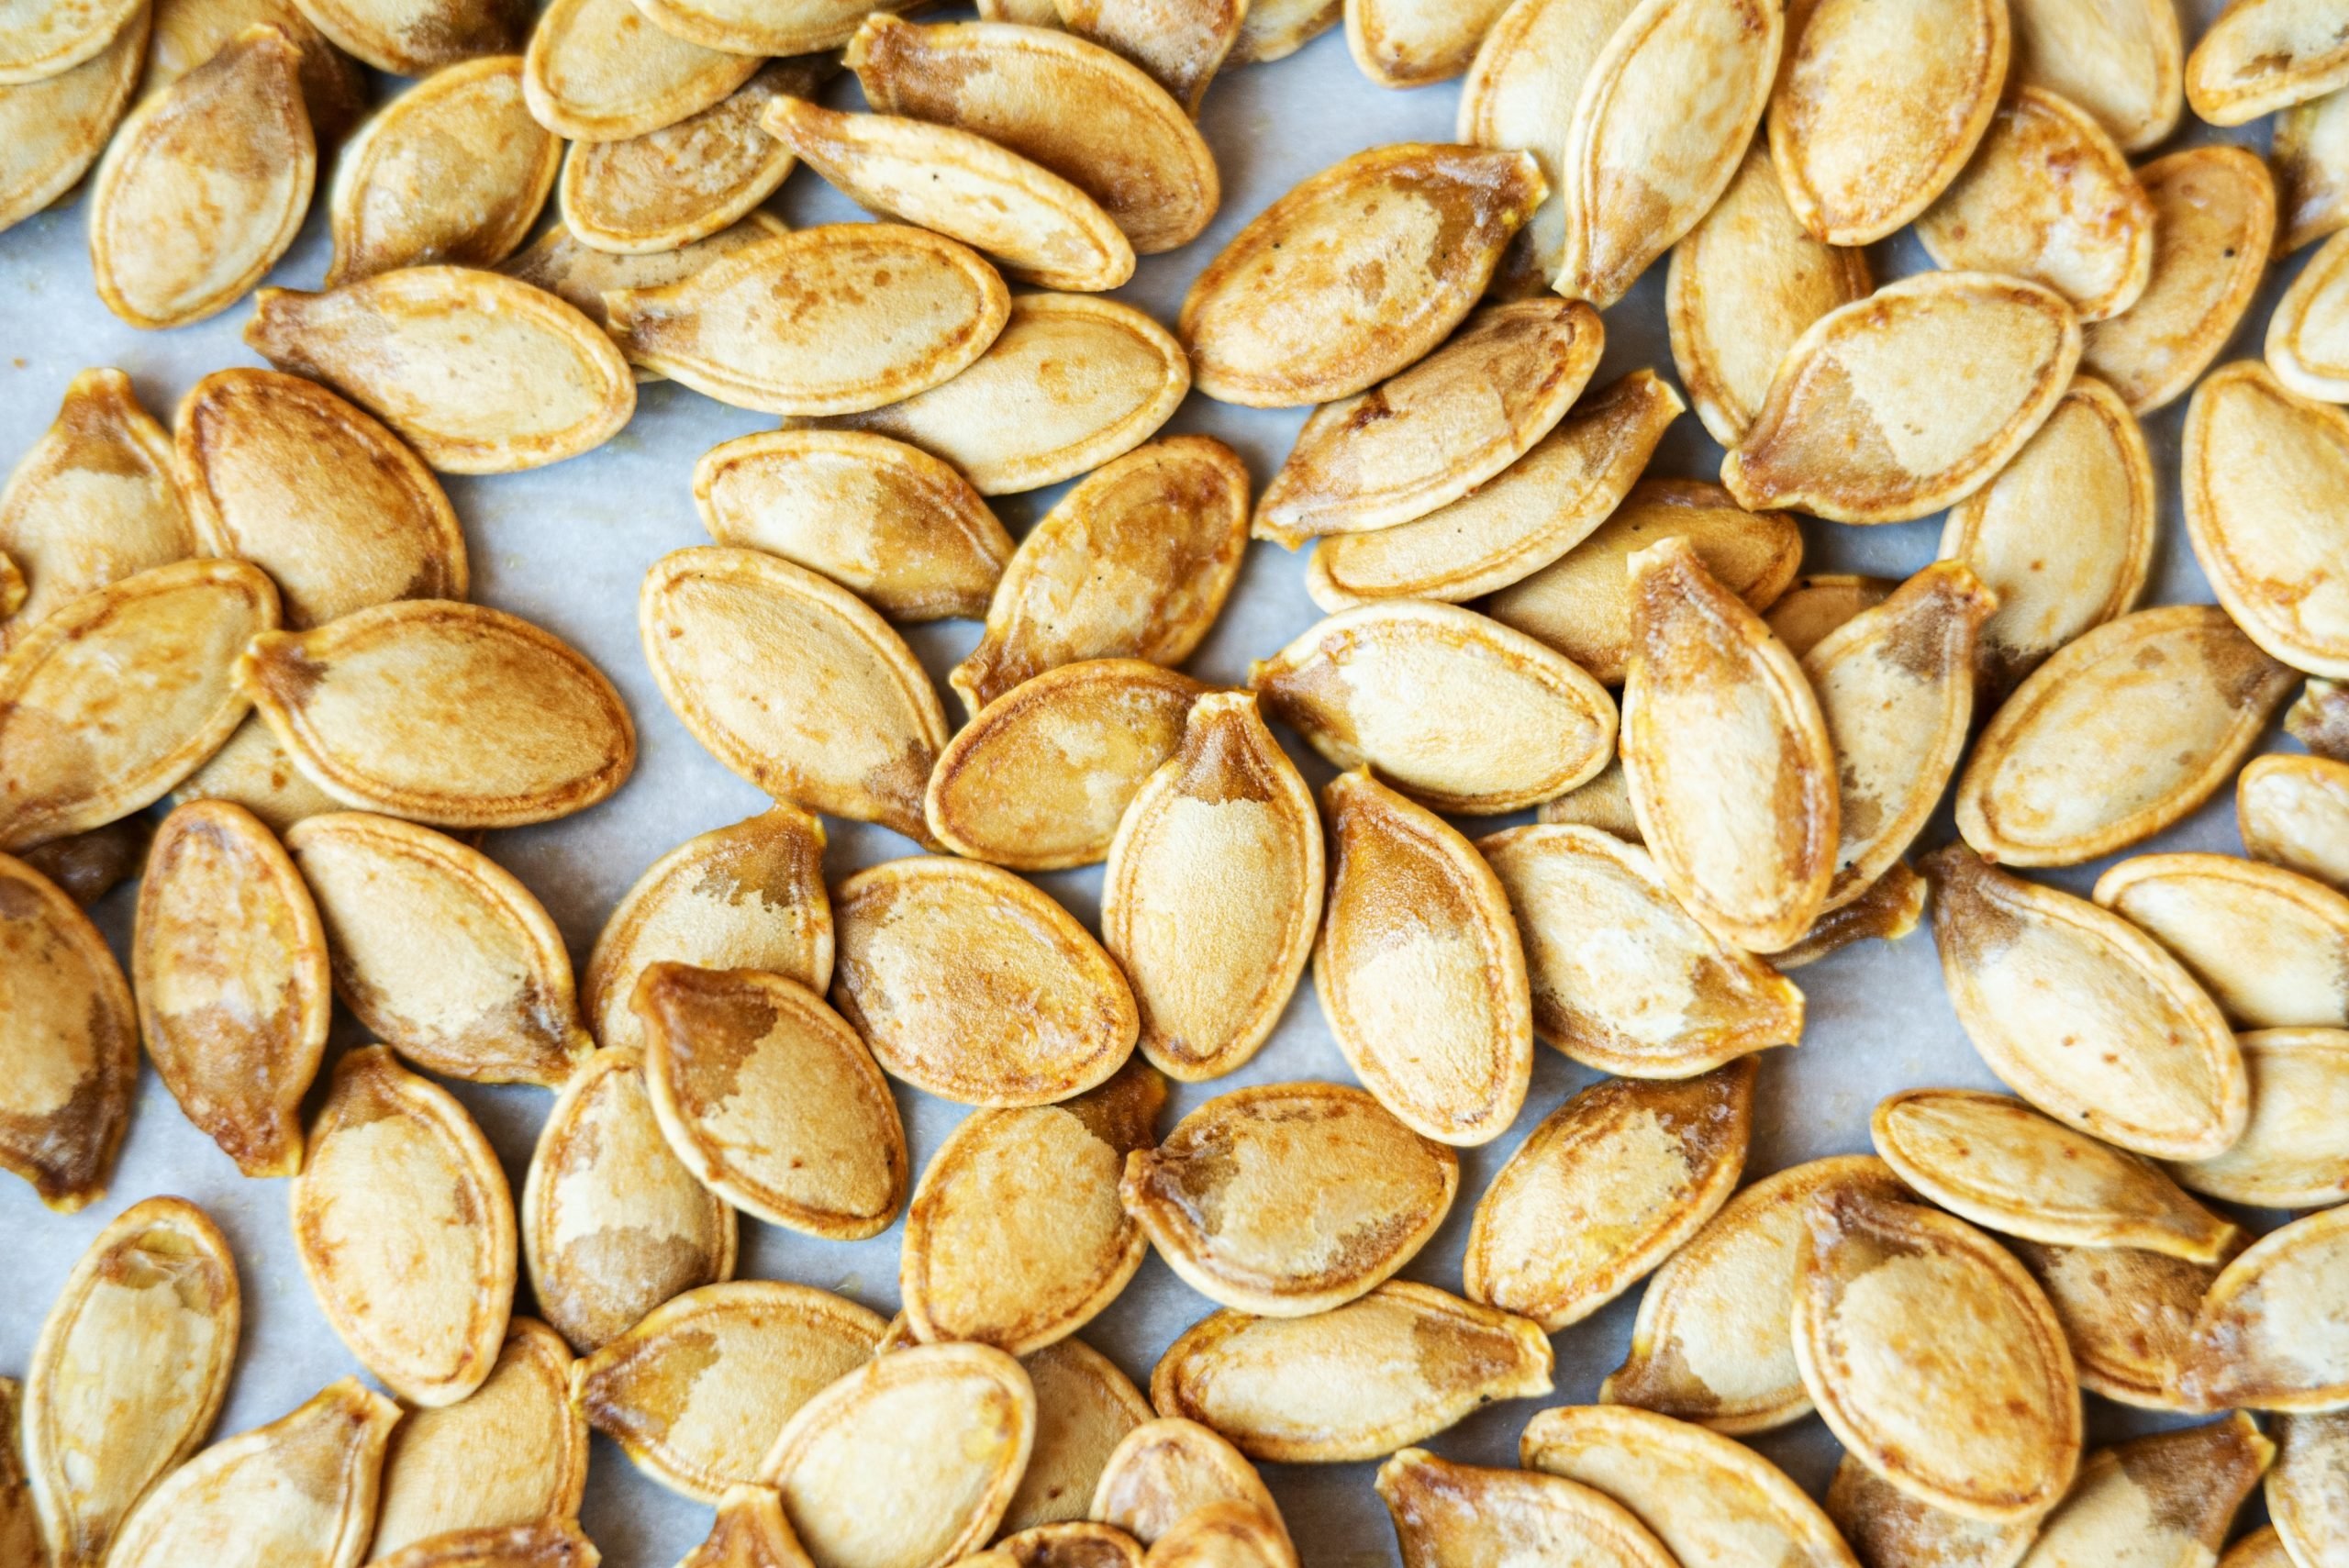 I Ate Pumpkin Seeds Every Day for a Week—Here's What Happened